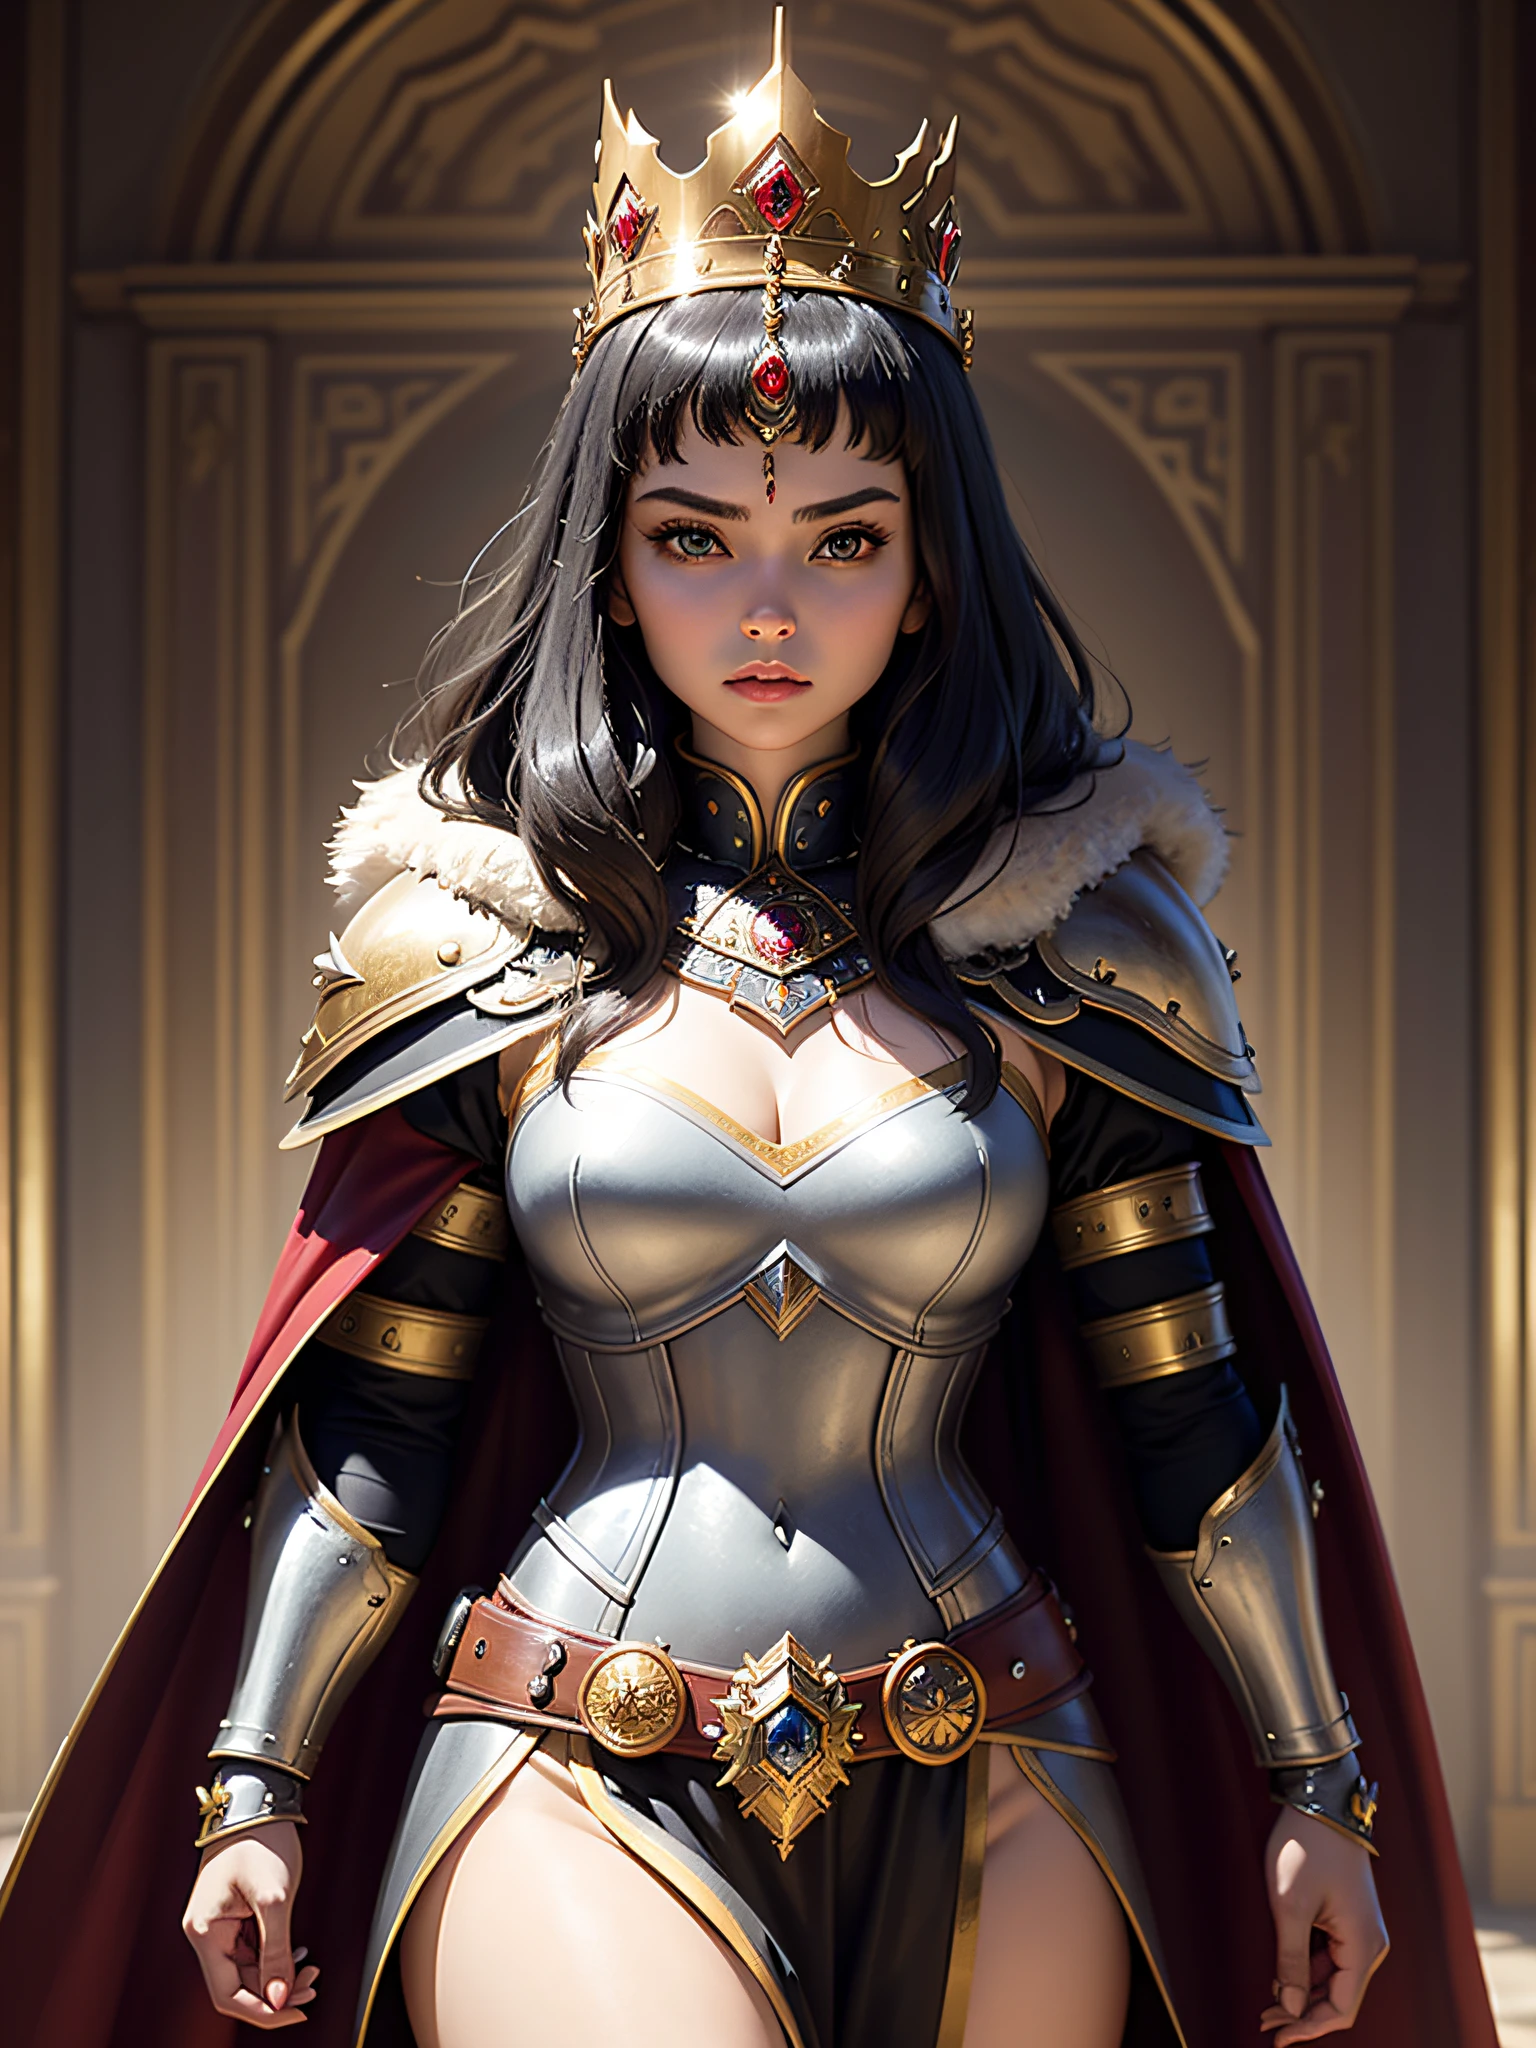 (Masterpiece, Top Quality, Top Quality, Official Art, Beautiful and Aesthetic: 1.2), (1 Girl), (Warrior Queen Armor, Fur-Lined Cape, Bejeweled Crown: 1.2), Serious, Black Hair, Big, Ultimate